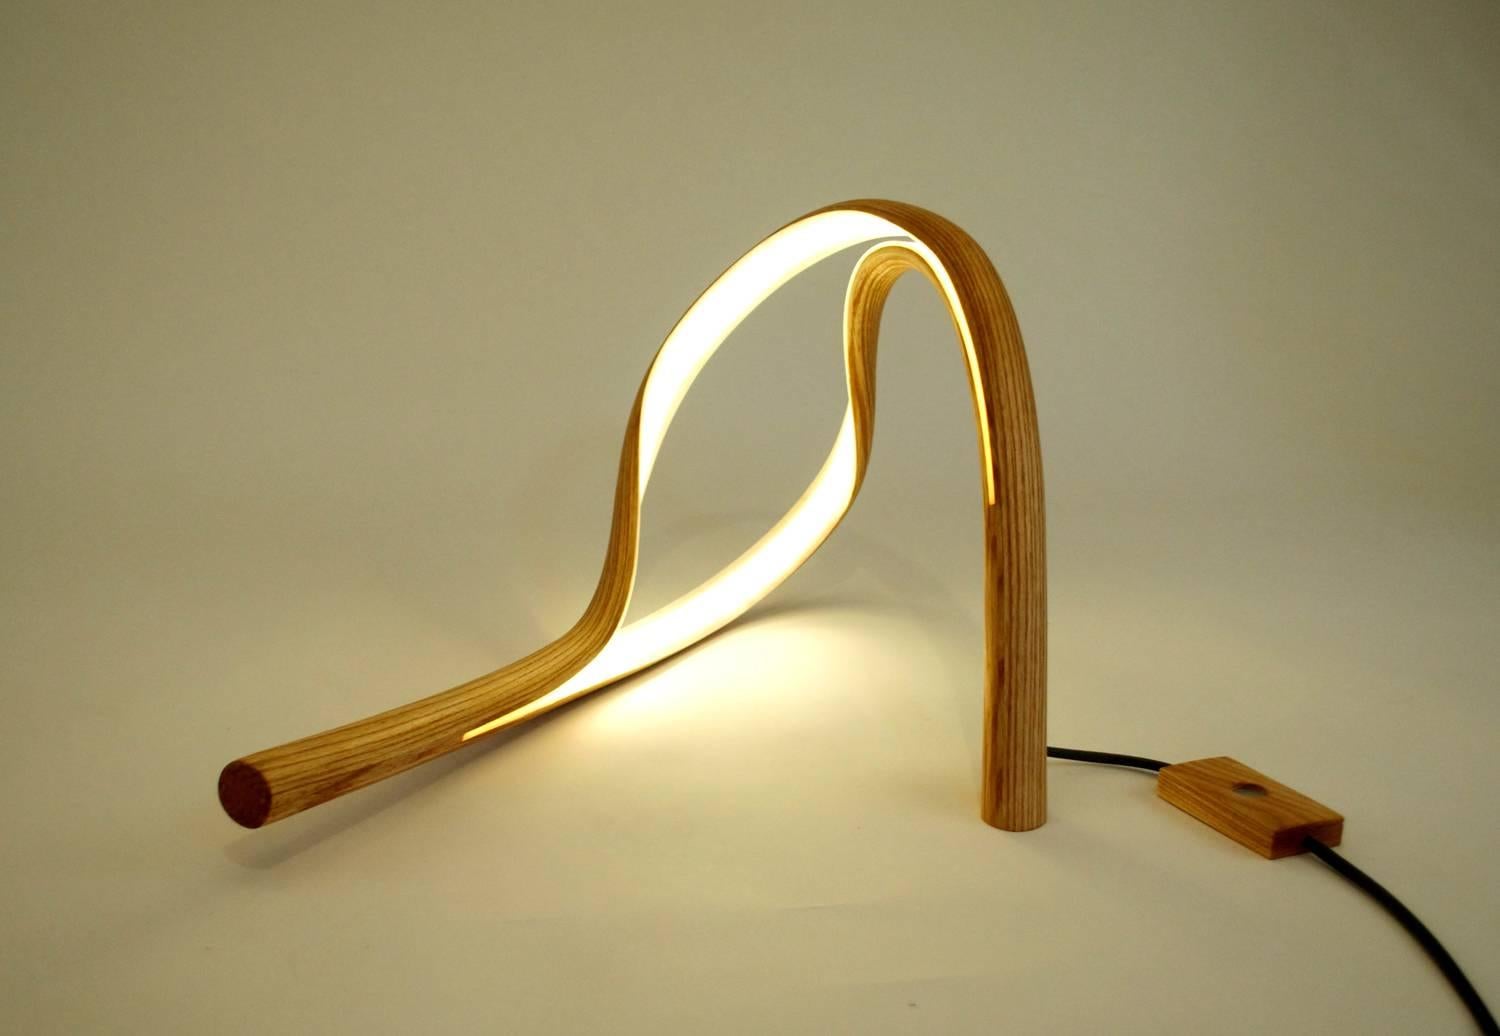 Having grown up around his carpenter father’s workshop, John Procario took his love for woodworking and brought it into the world of design. After studying sculpture in grad school, Procario developed a unique aesthetic that influences his